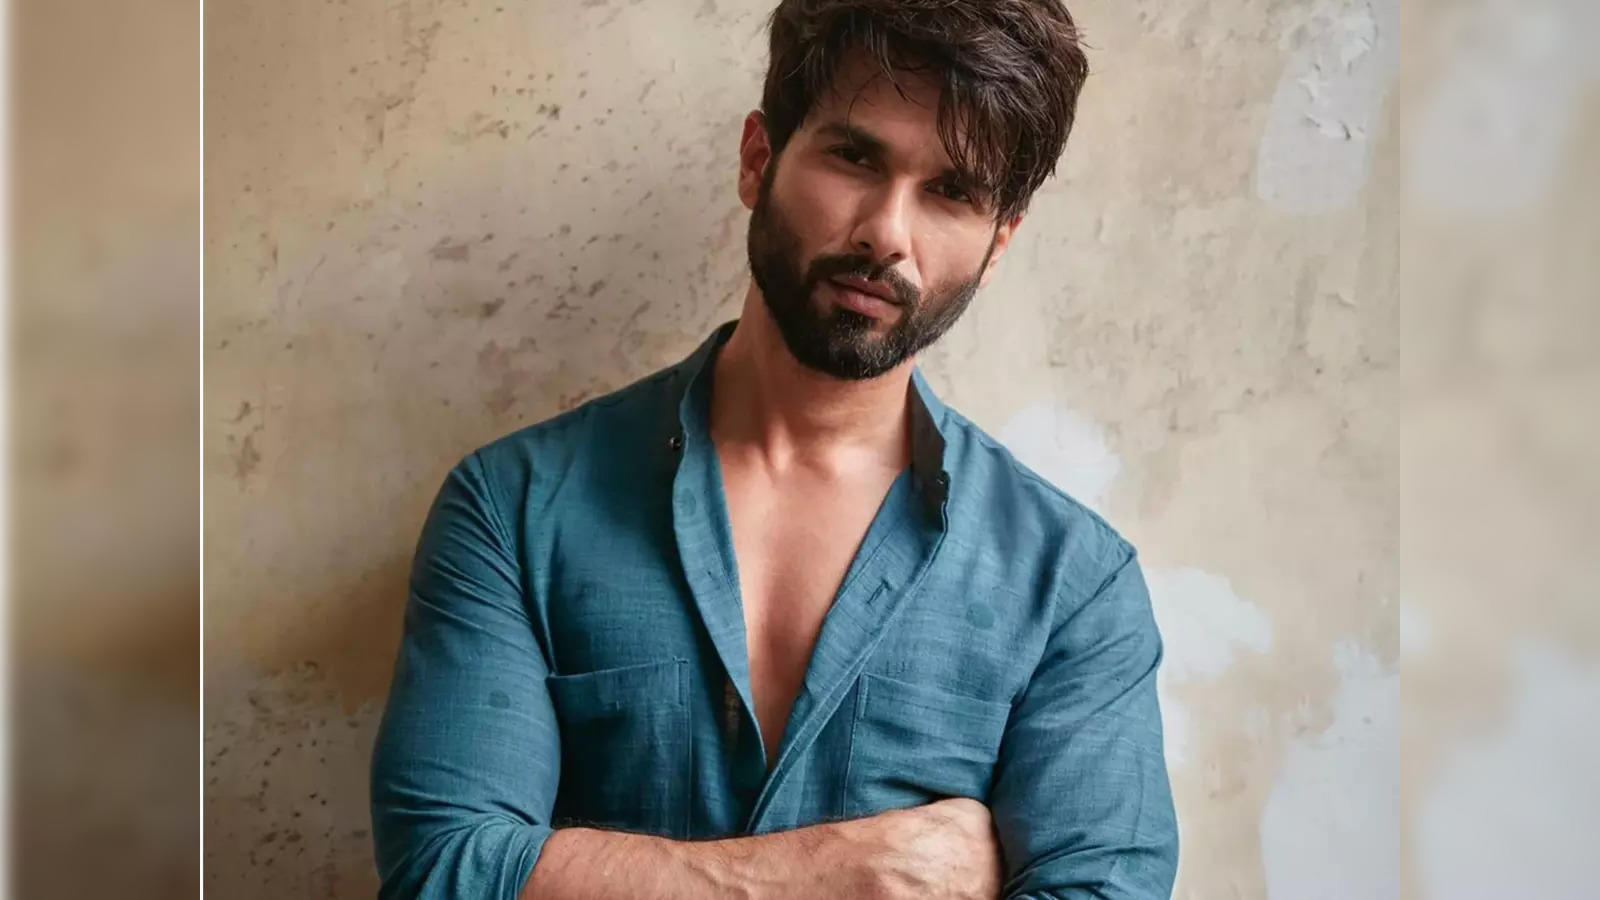 Shahid Kapoor gears up for first press conference post-marriage